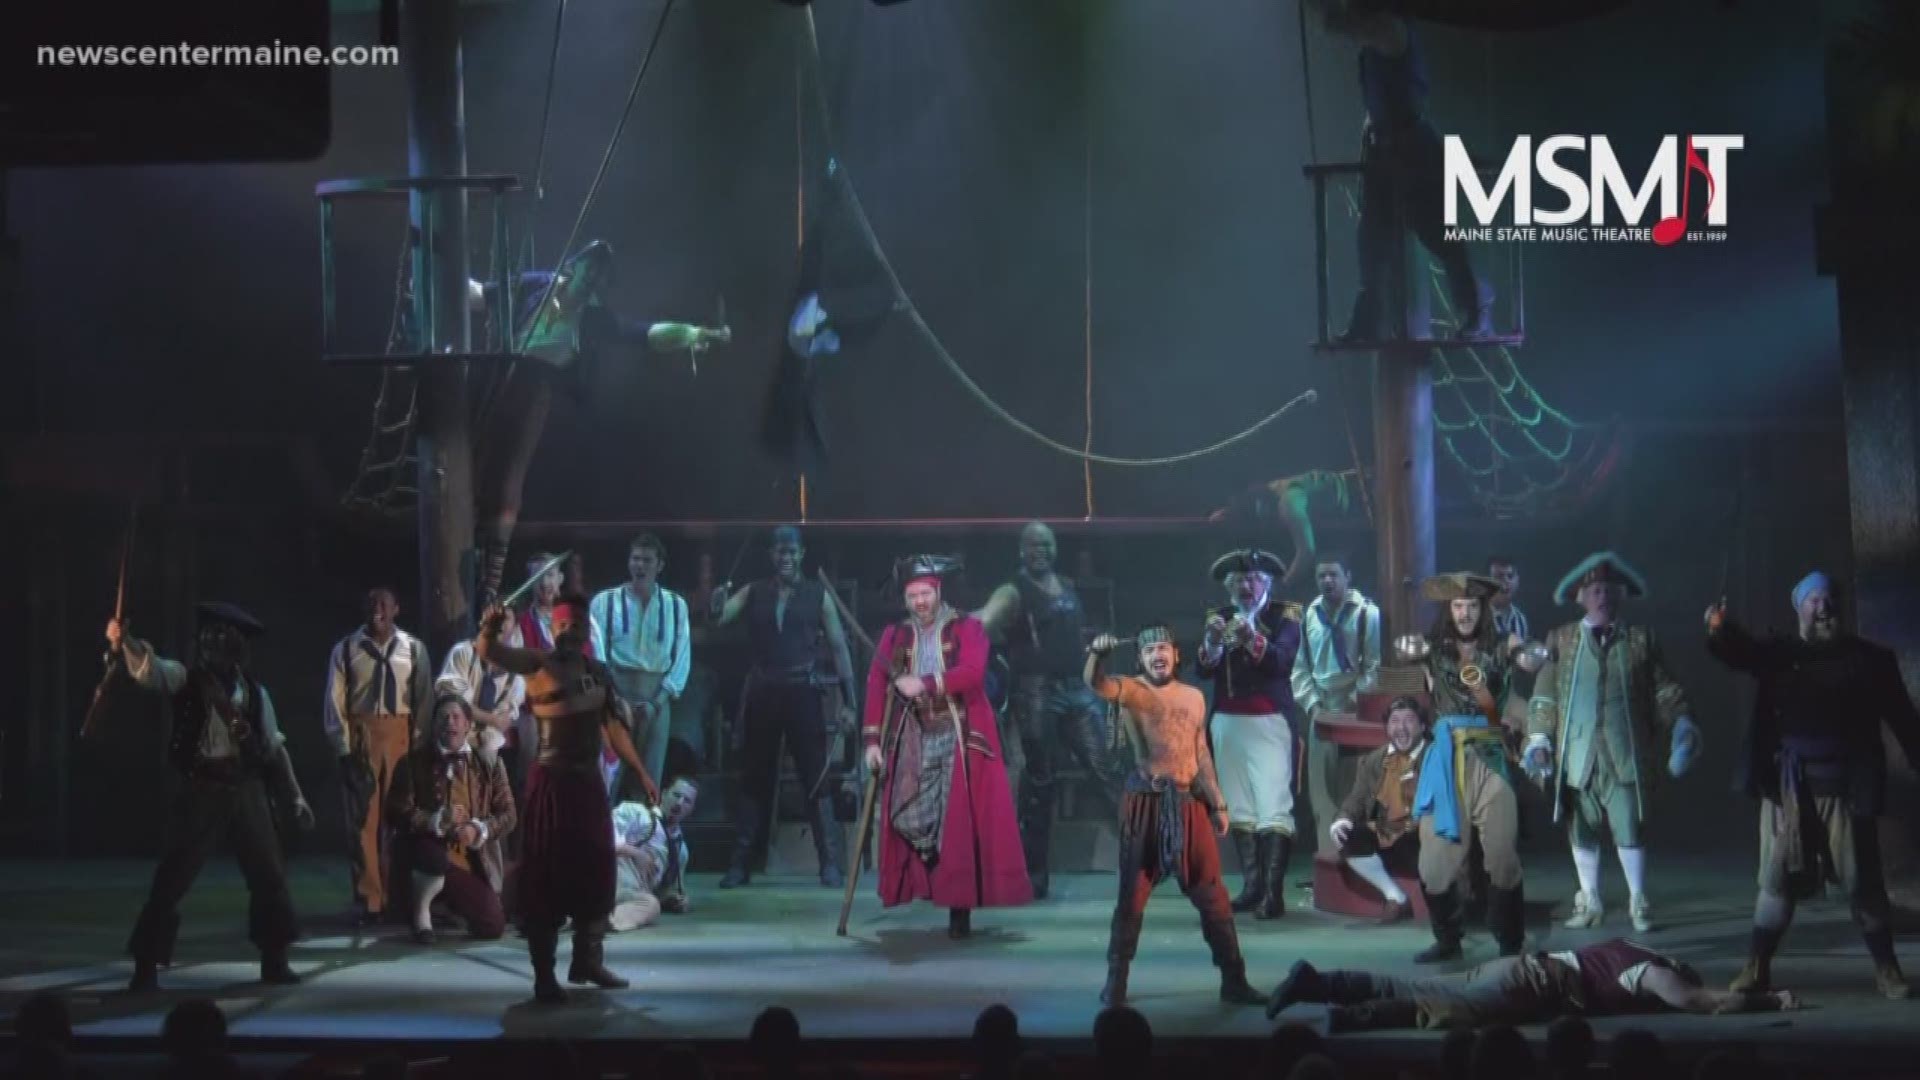 The musical "Treasure Island" is an adaptation of the book.